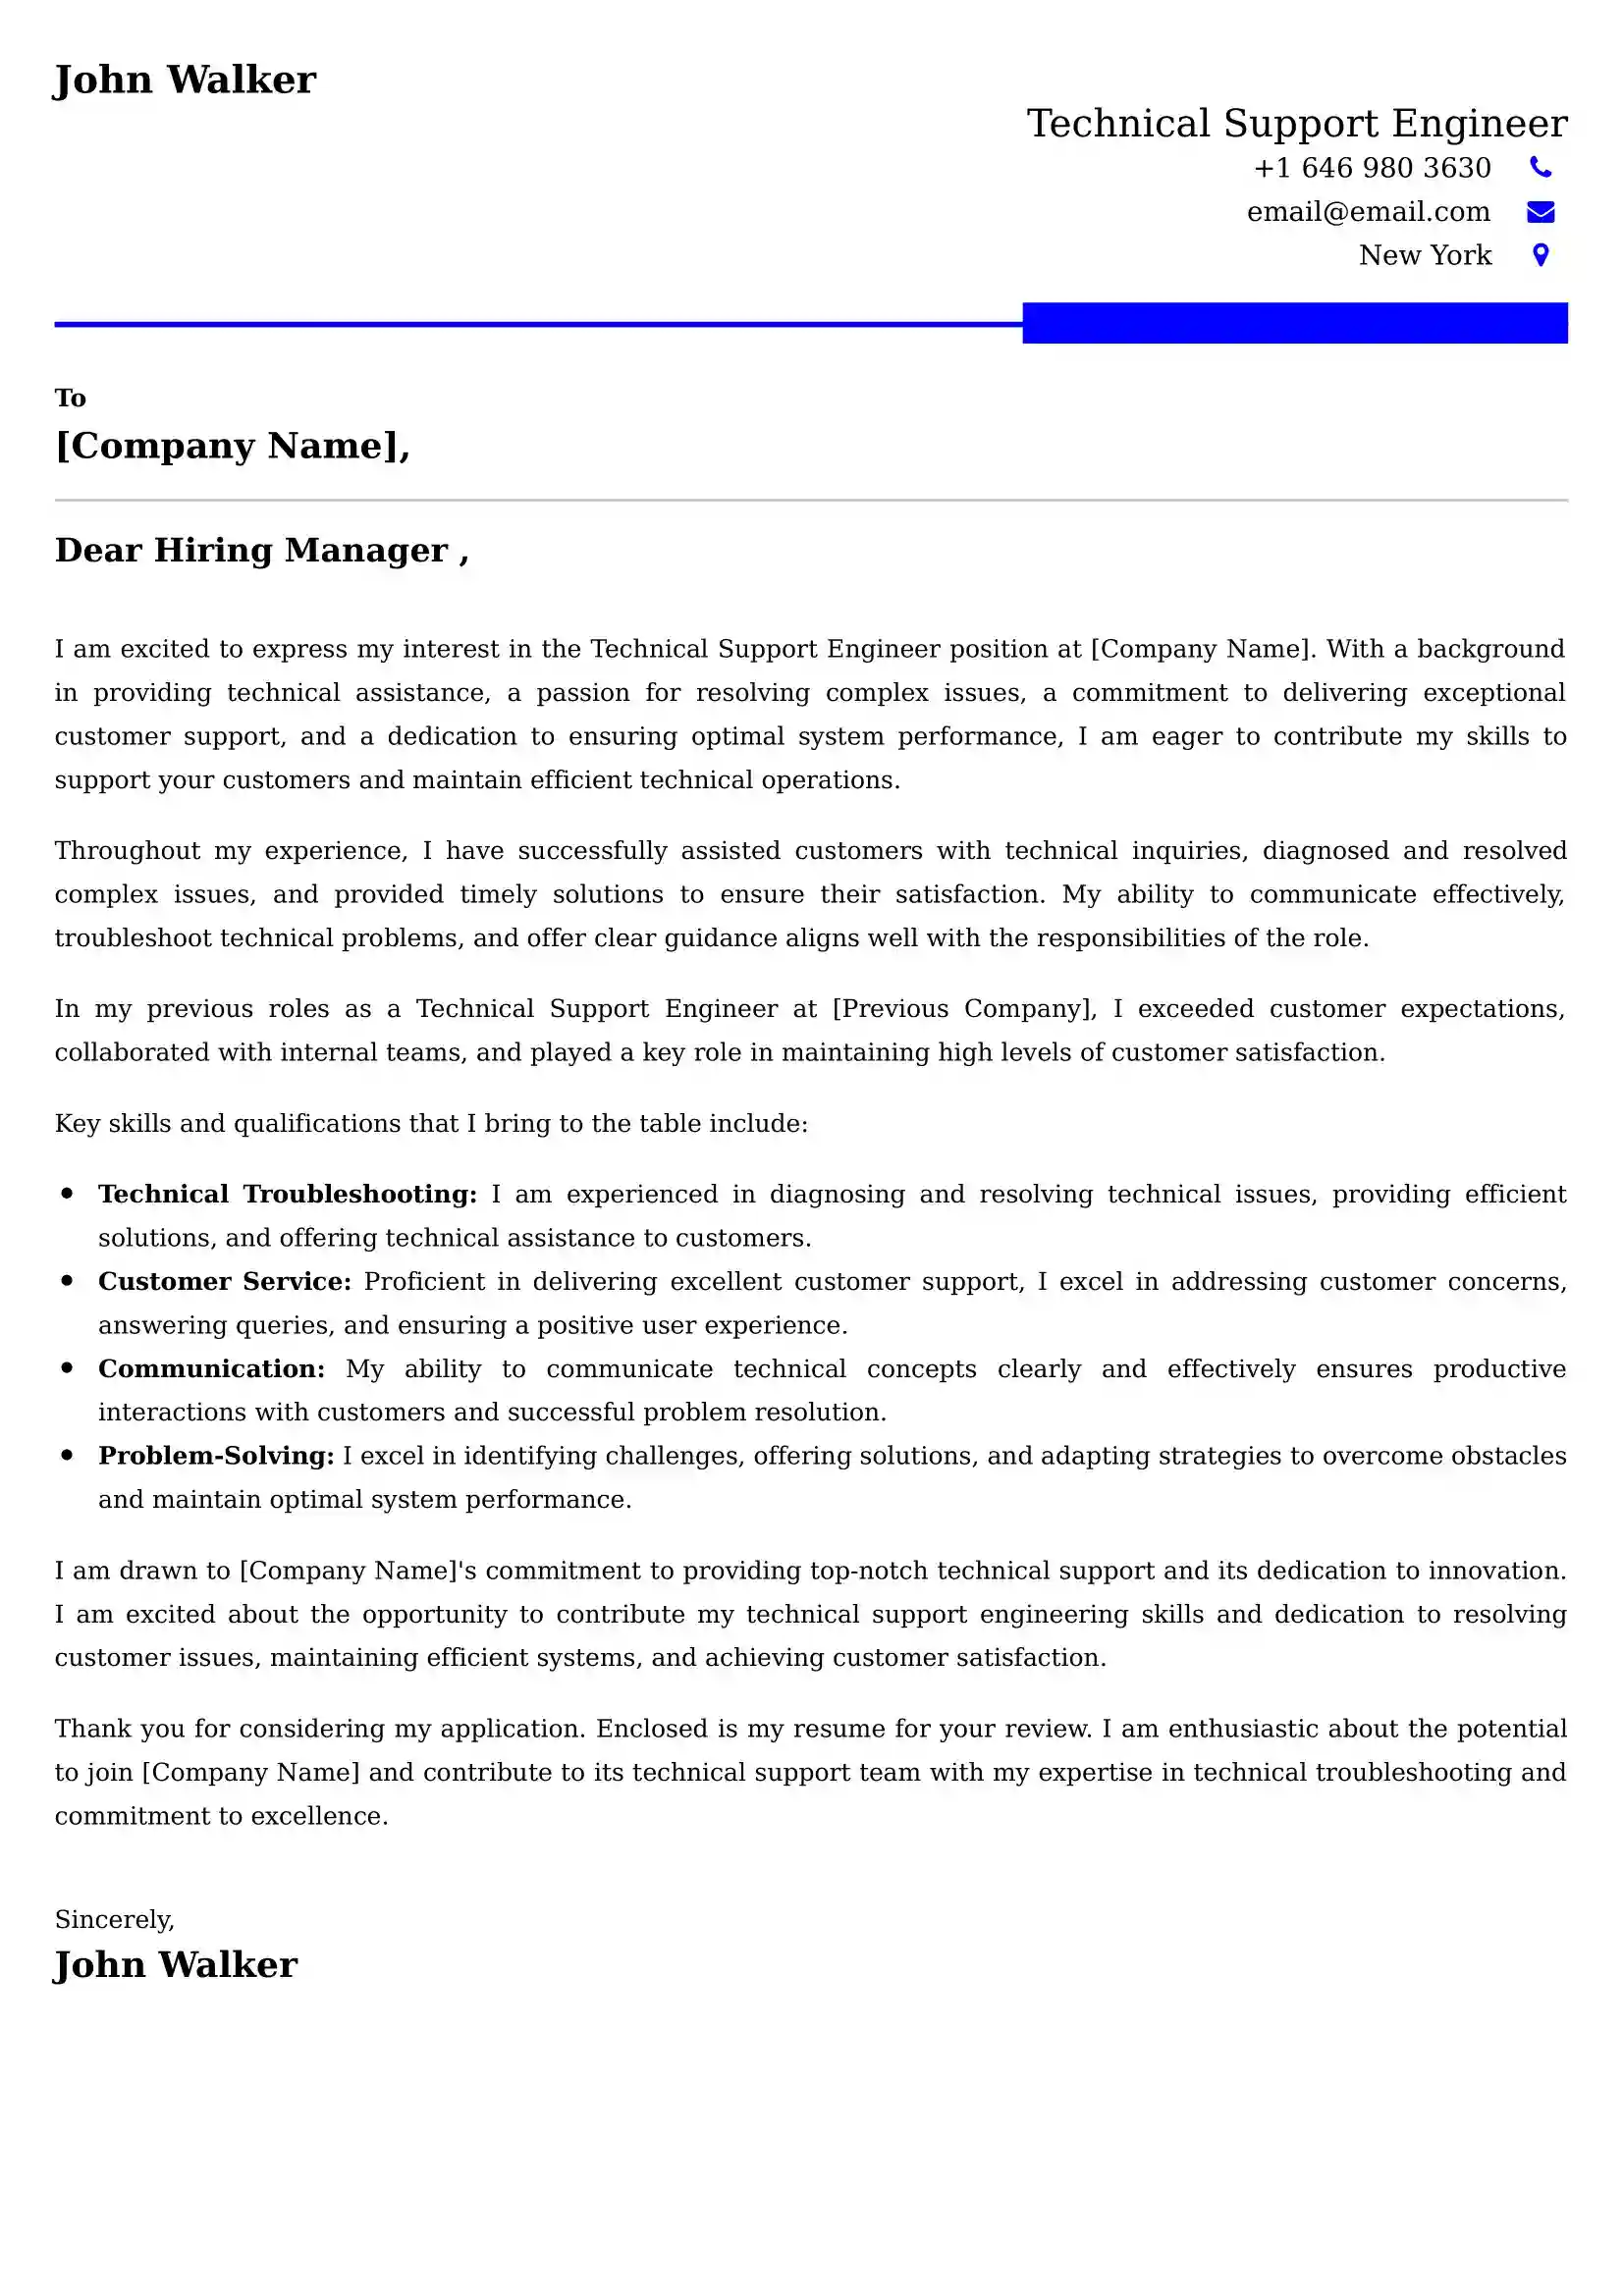 Technical Support Engineer Cover Letter Examples - Latest UK Format